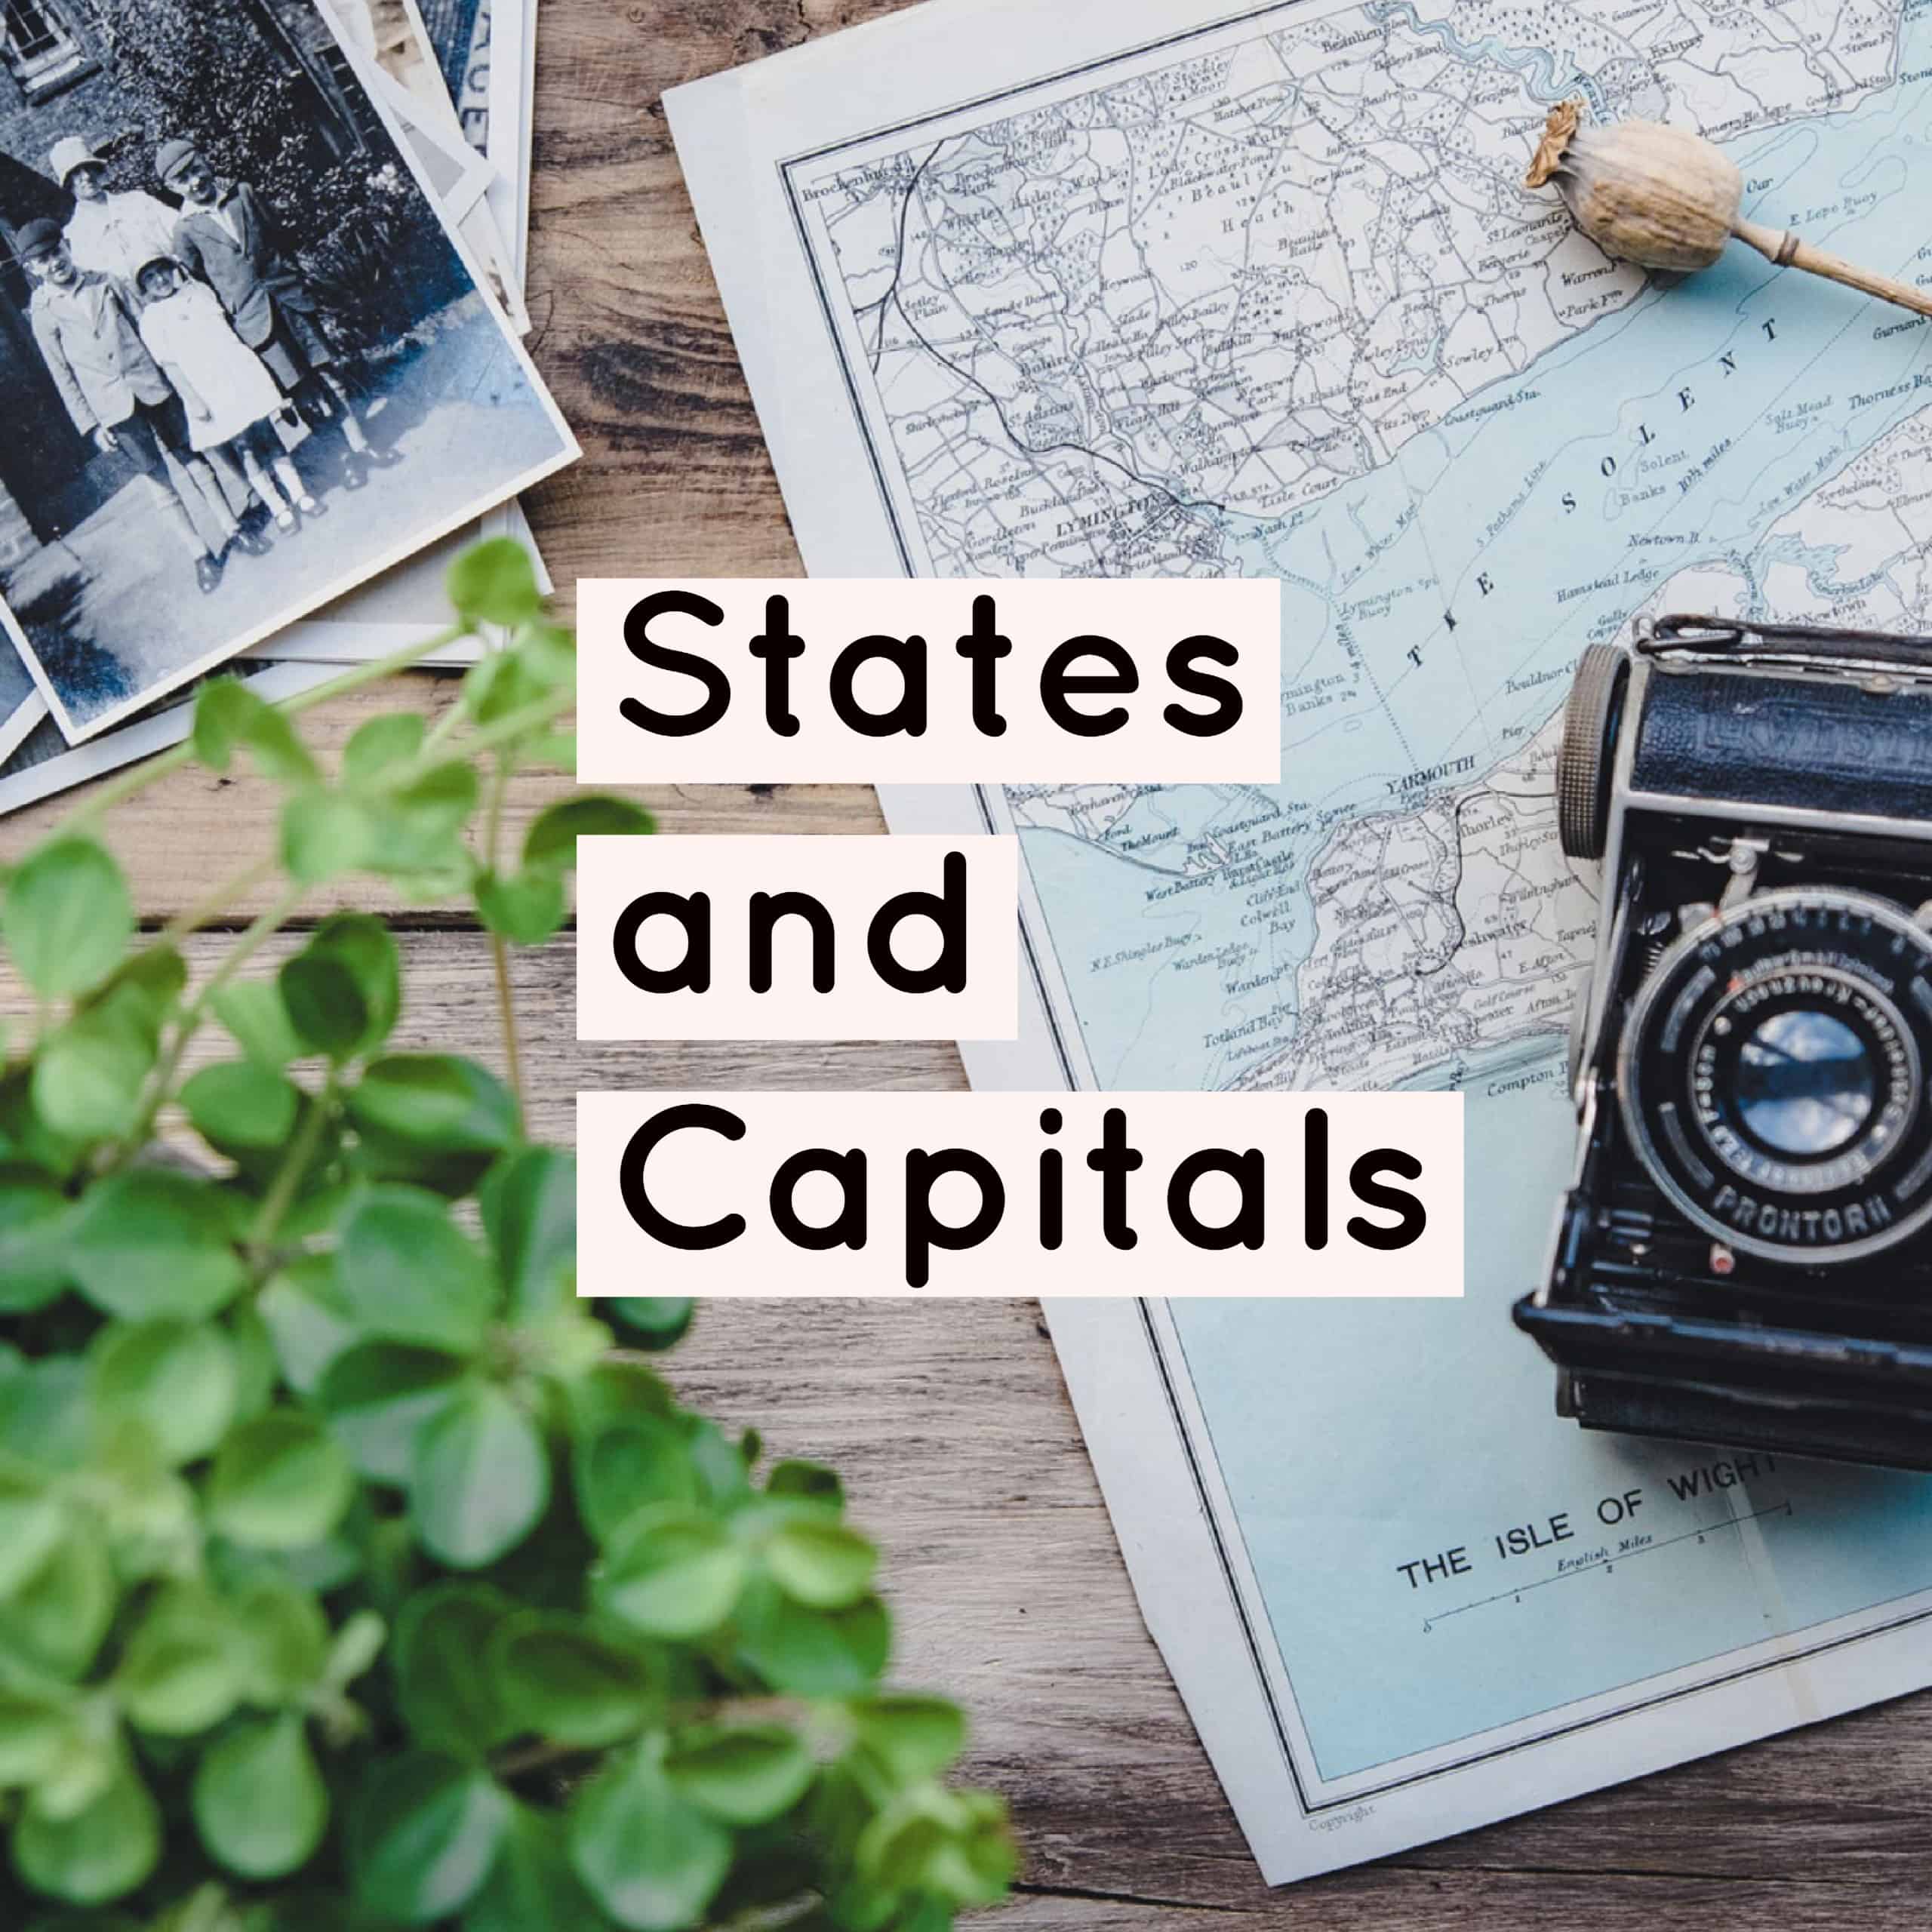 states-and-capitals-edtech-methods